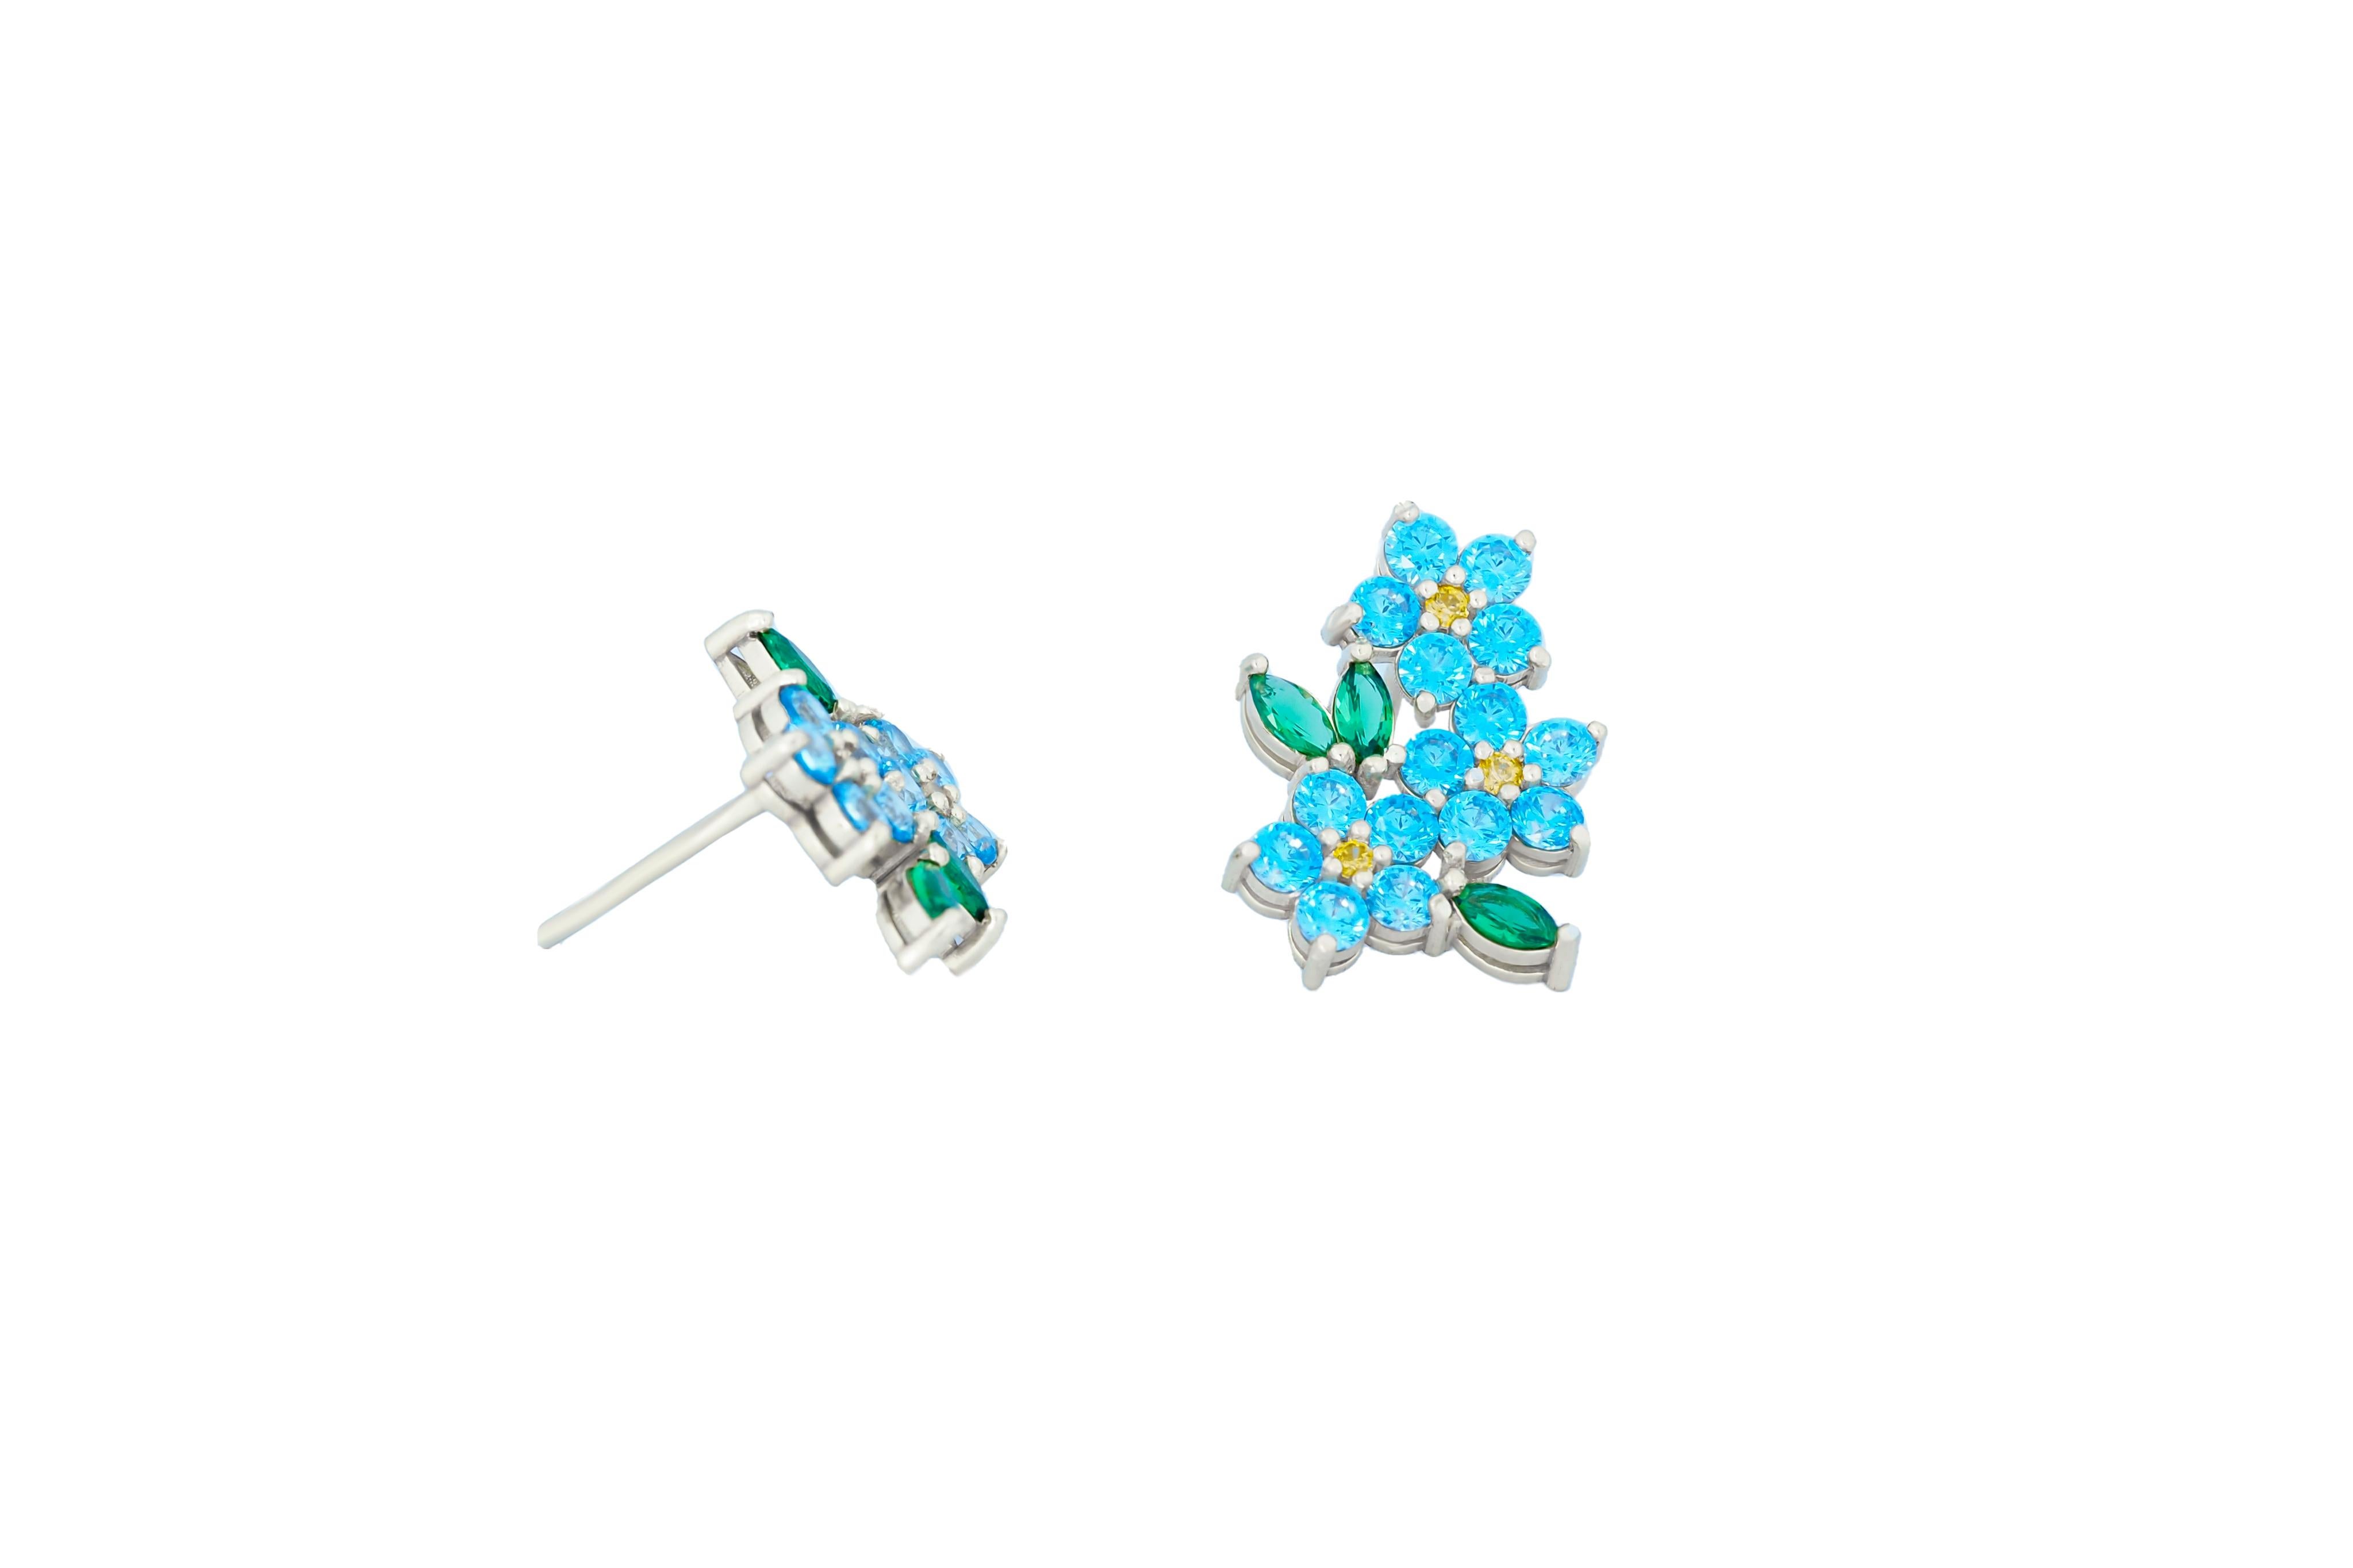 Round Cut Forget me know flower earrings studs in 14k gold